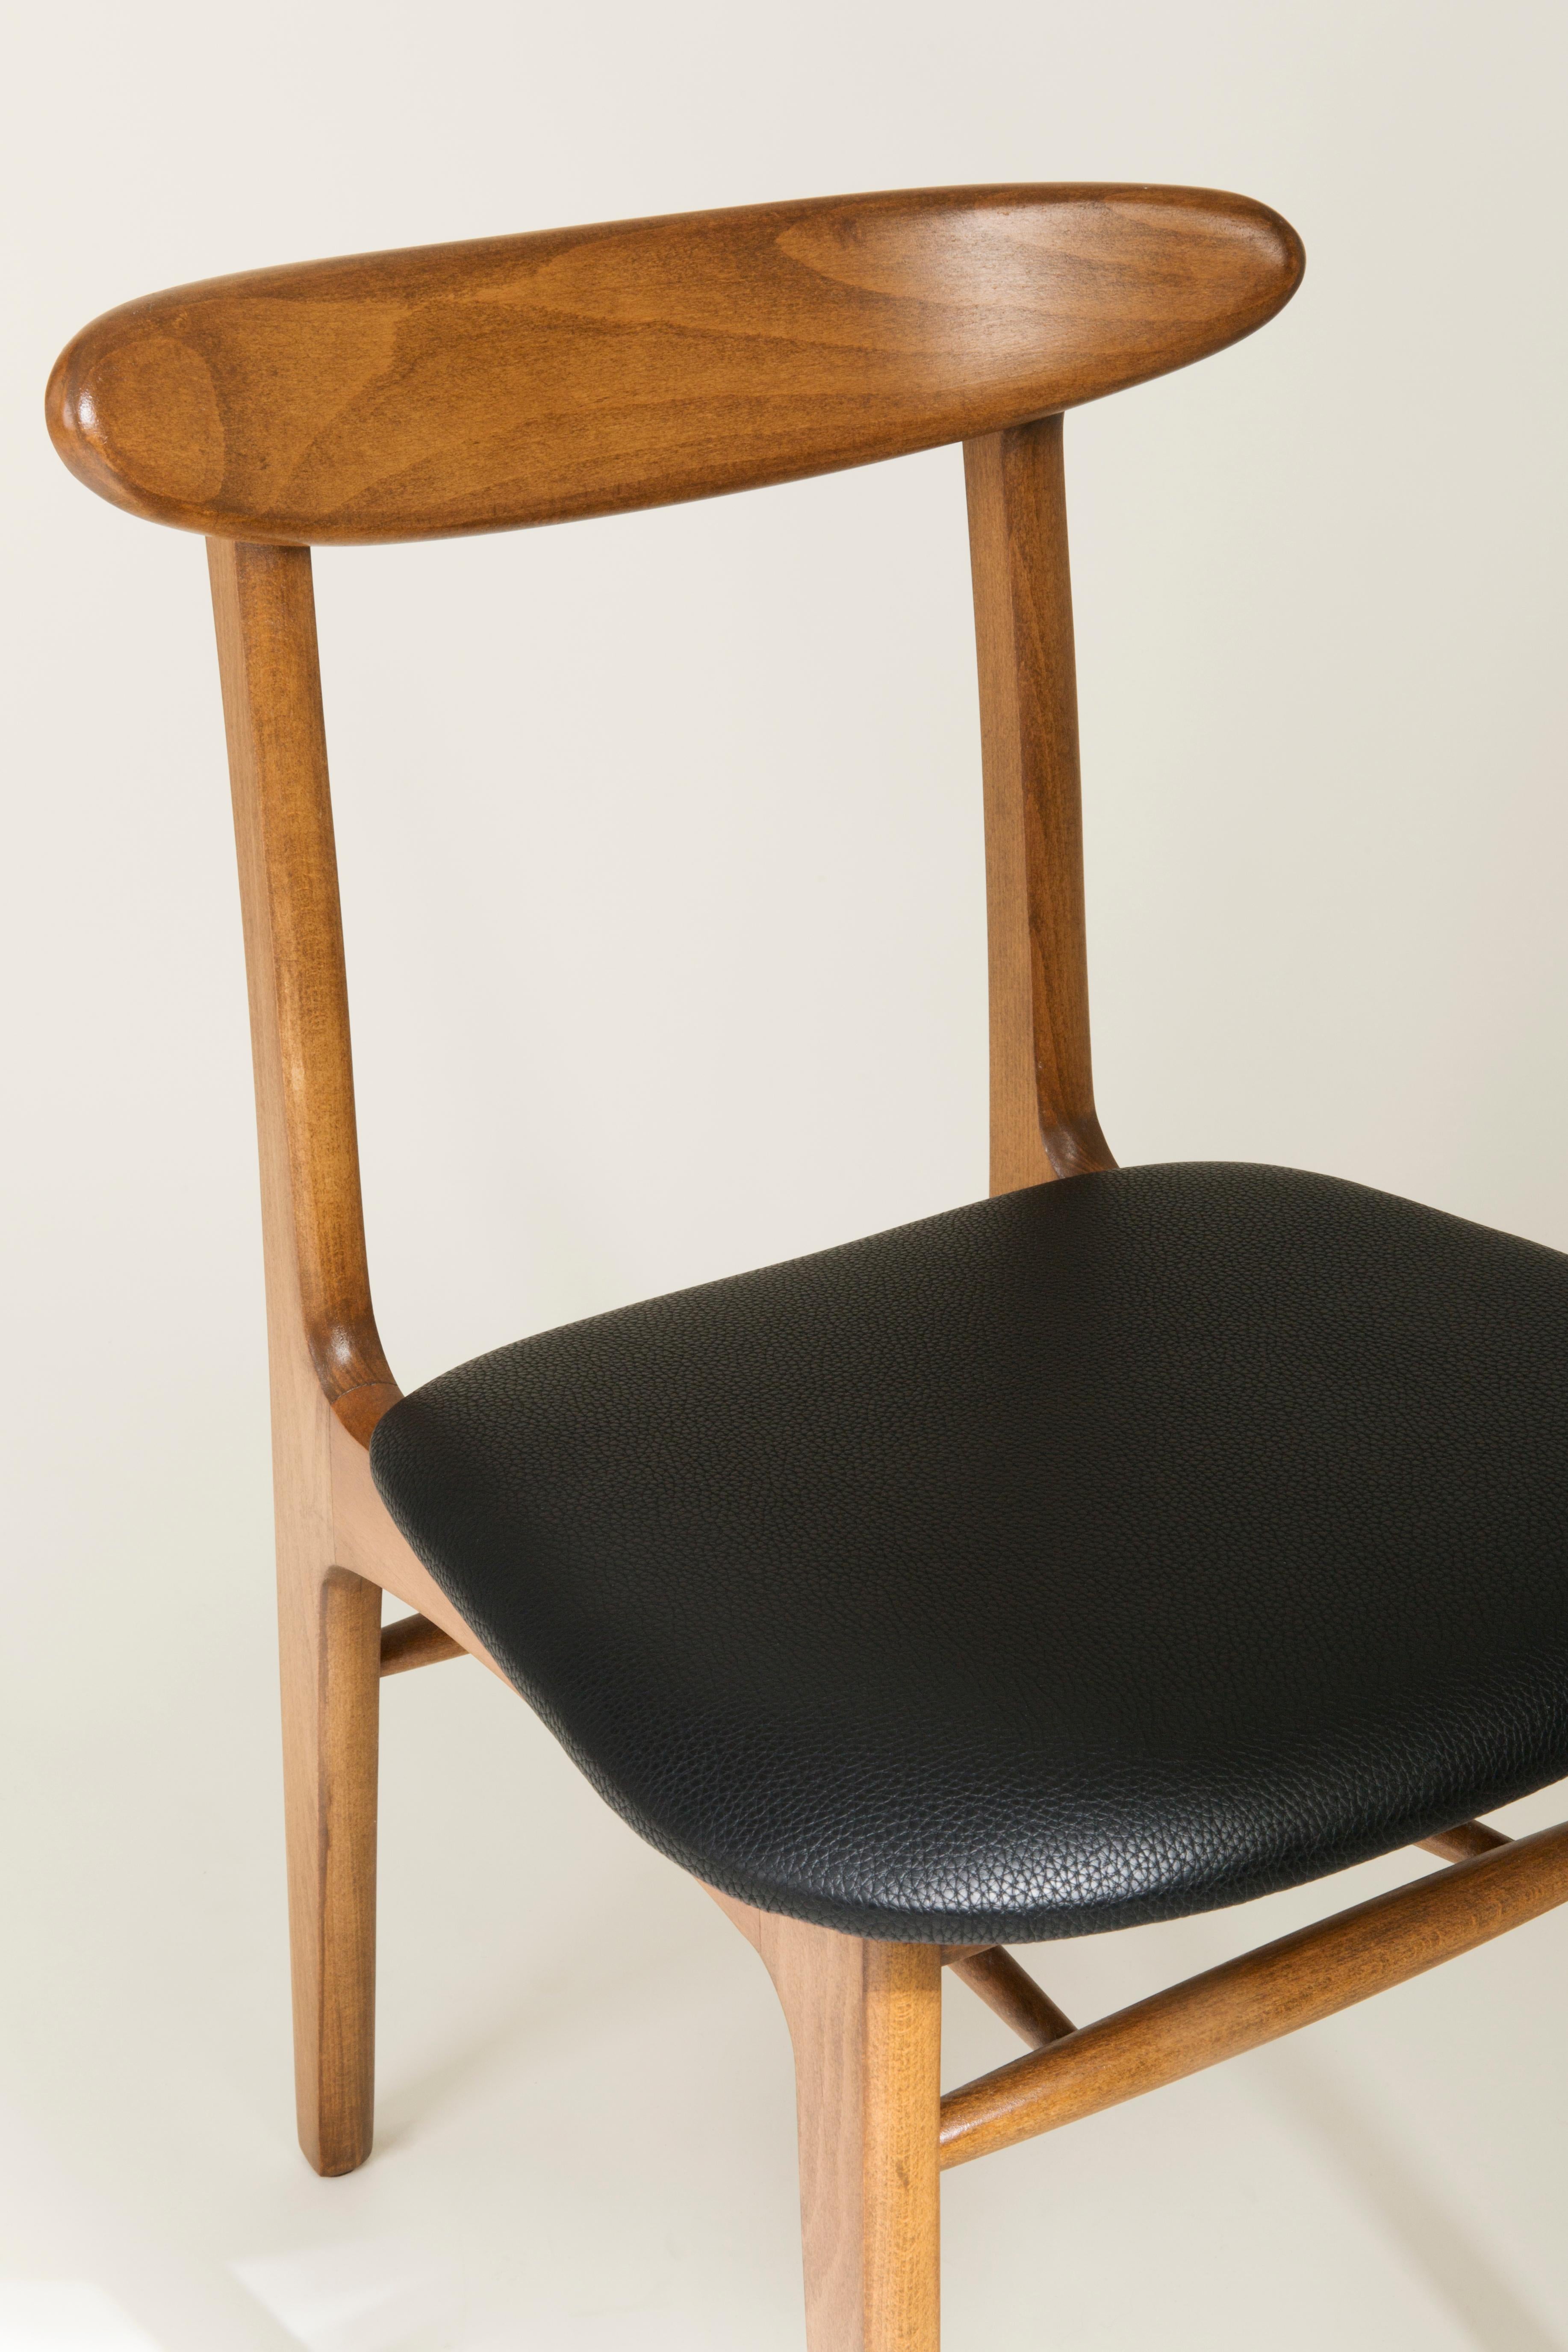 Polish Set of Five Vintage Faux Leather Dining Chairs, 1960s For Sale